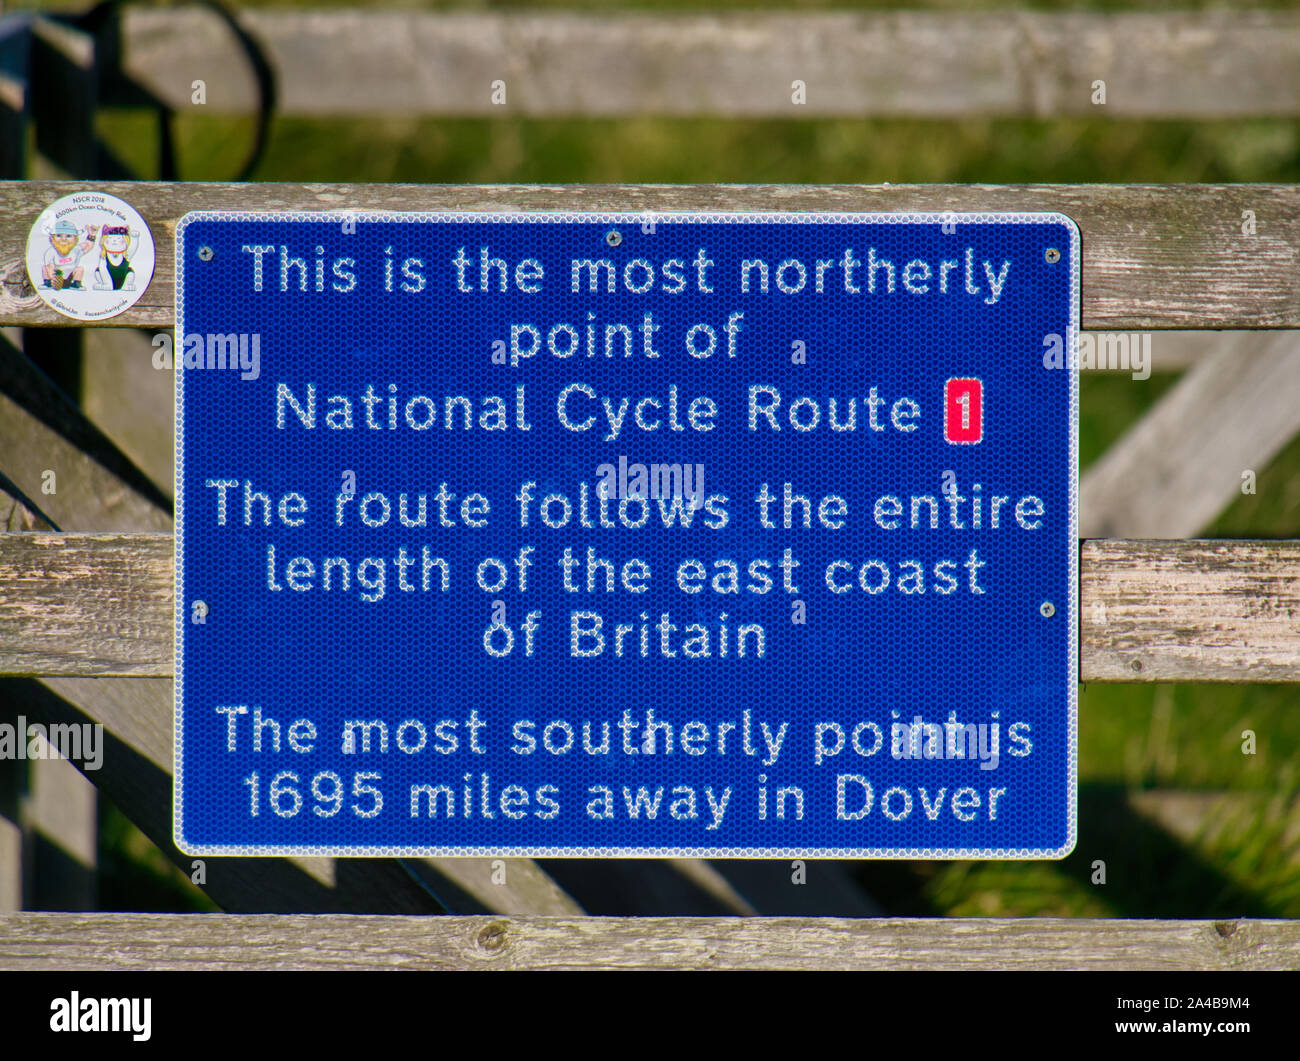 A blue sign marking the most northerly point of UK National Cycle Route 1, in Skaw on the island of Unst in Shetland, Scotland, UK. Stock Photo